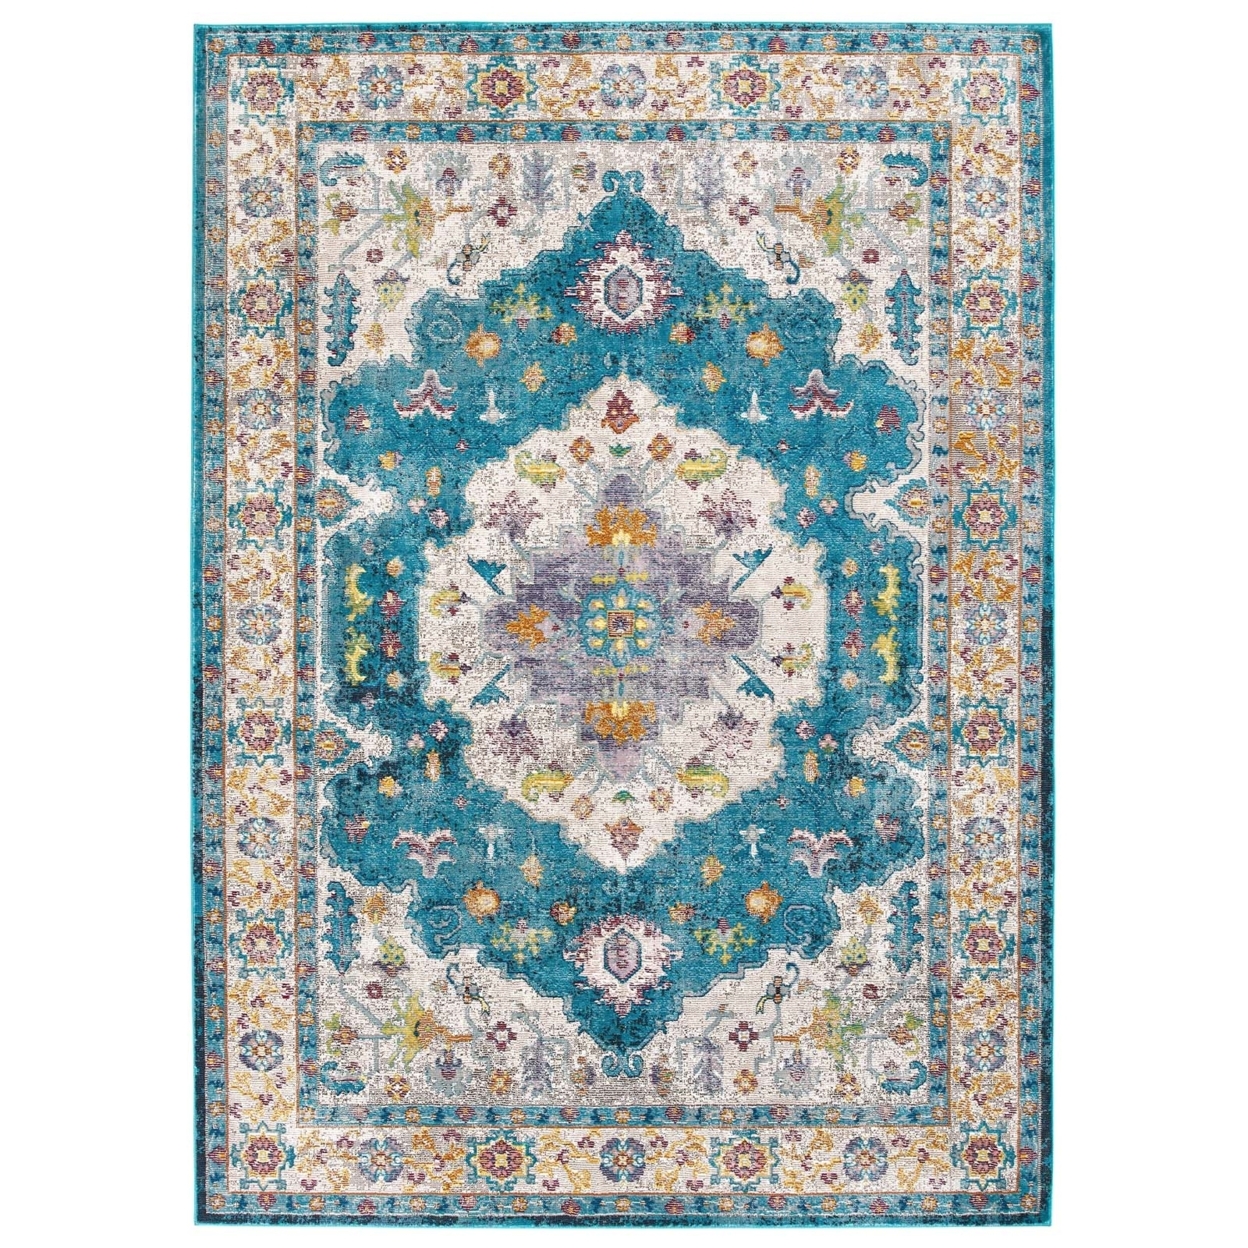 Success Anisah Distressed Floral Persian Medallion 4x6 Area Rug, Blue, Ivory, Yellow, Orange